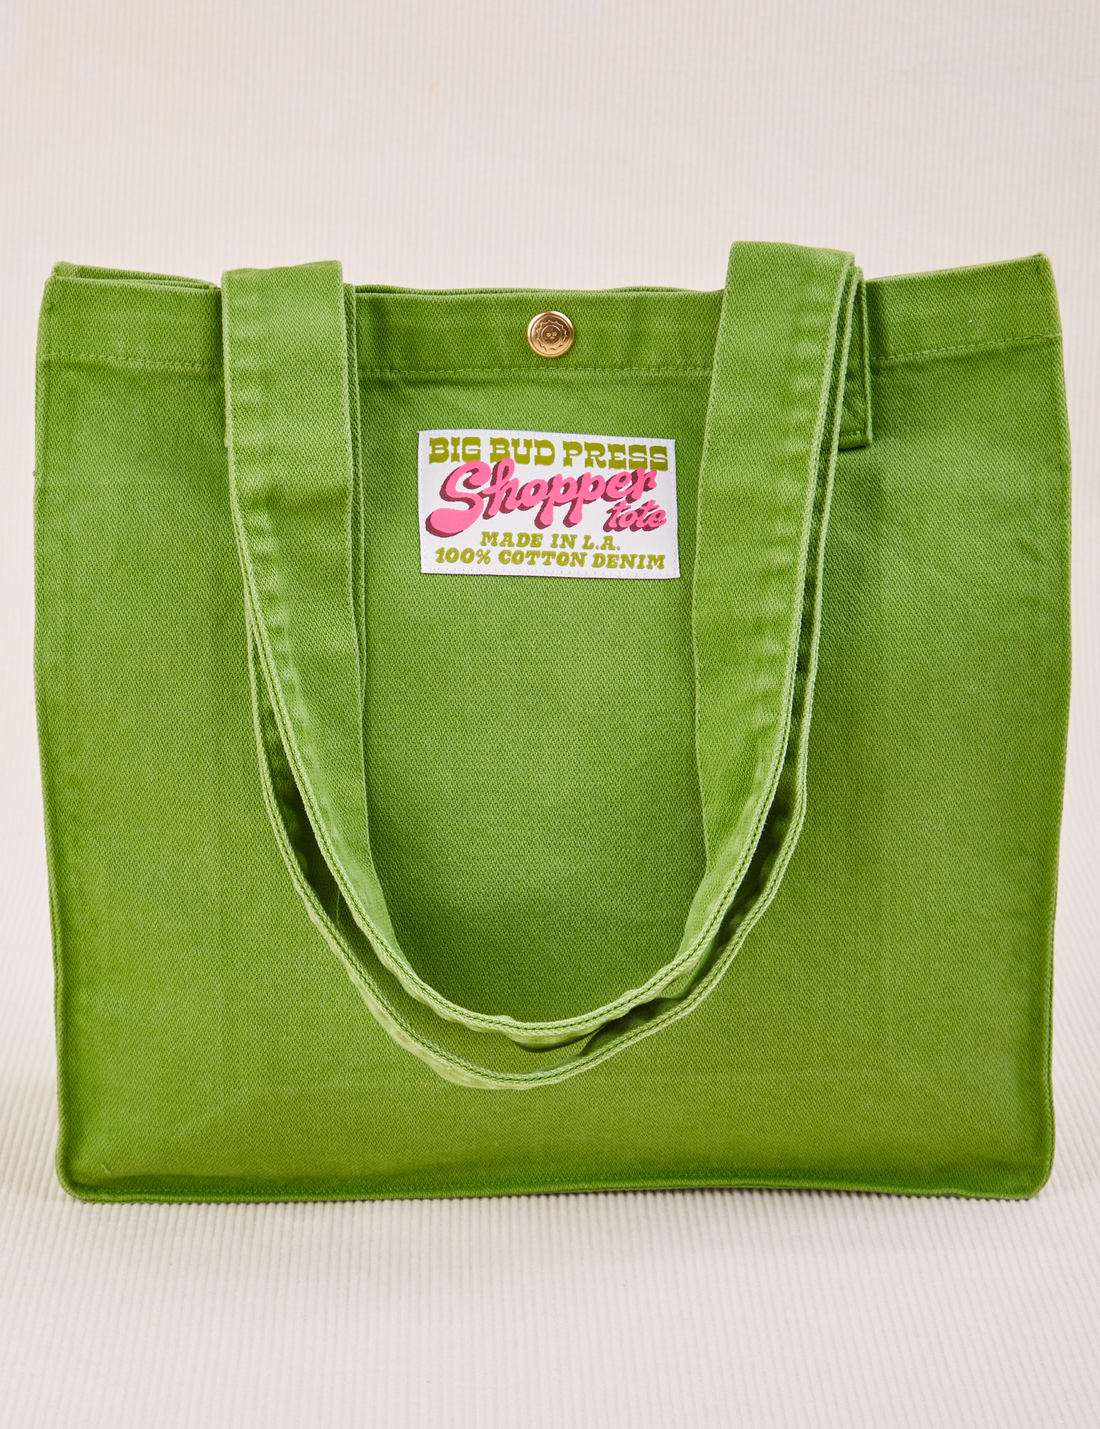 Shopper Tote Bag in Bright Olive with straps hanging down front of bag